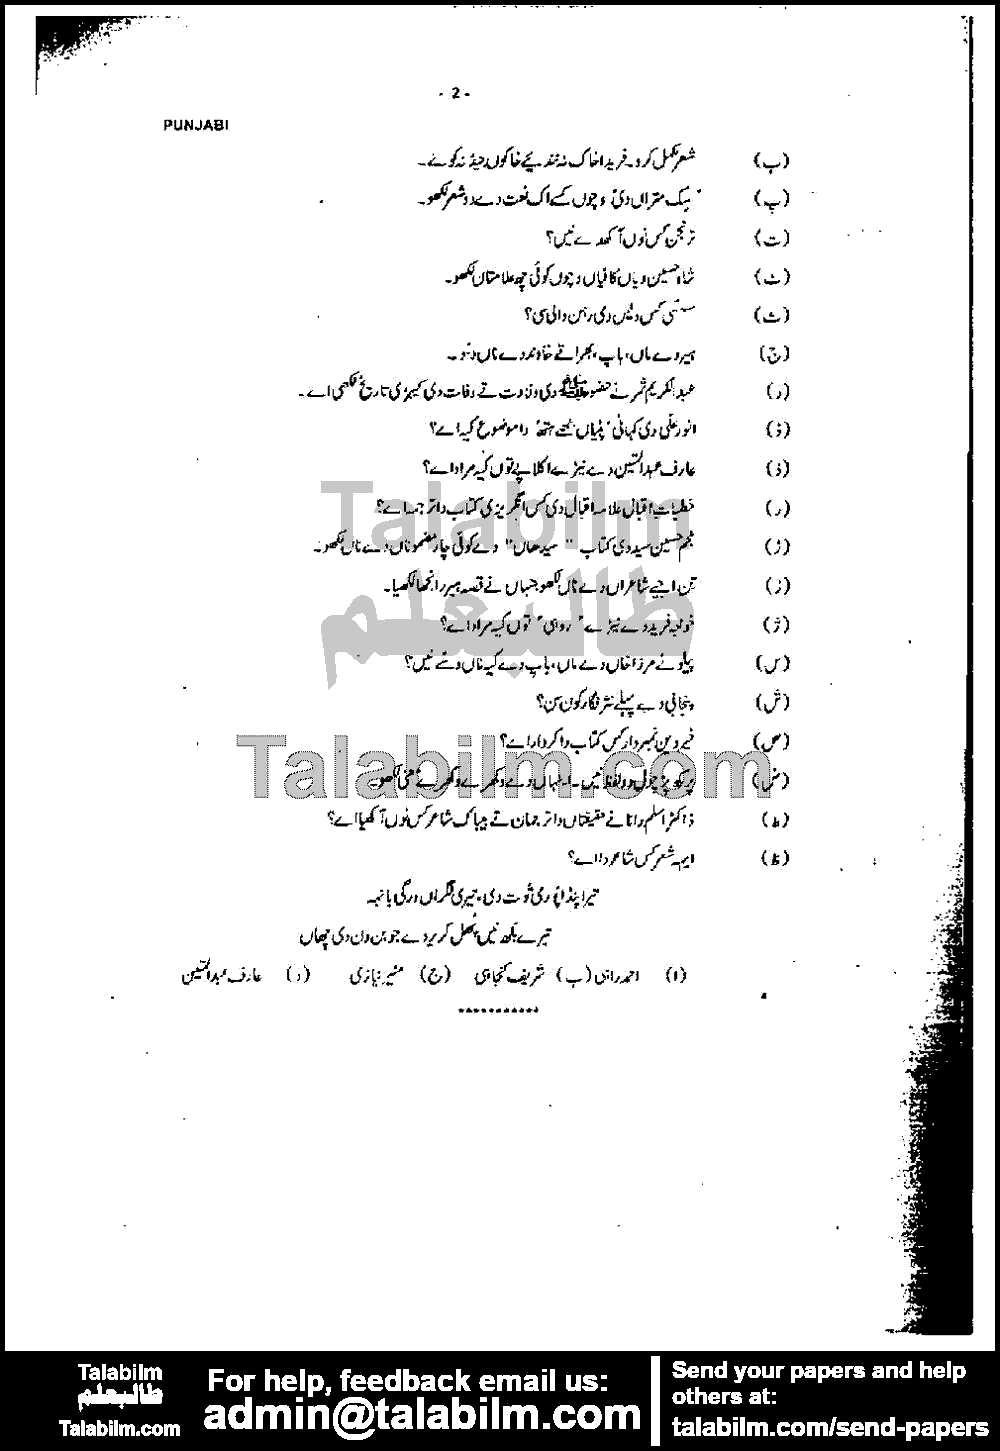 Punjabi 0 past paper for 2002 Page No. 2